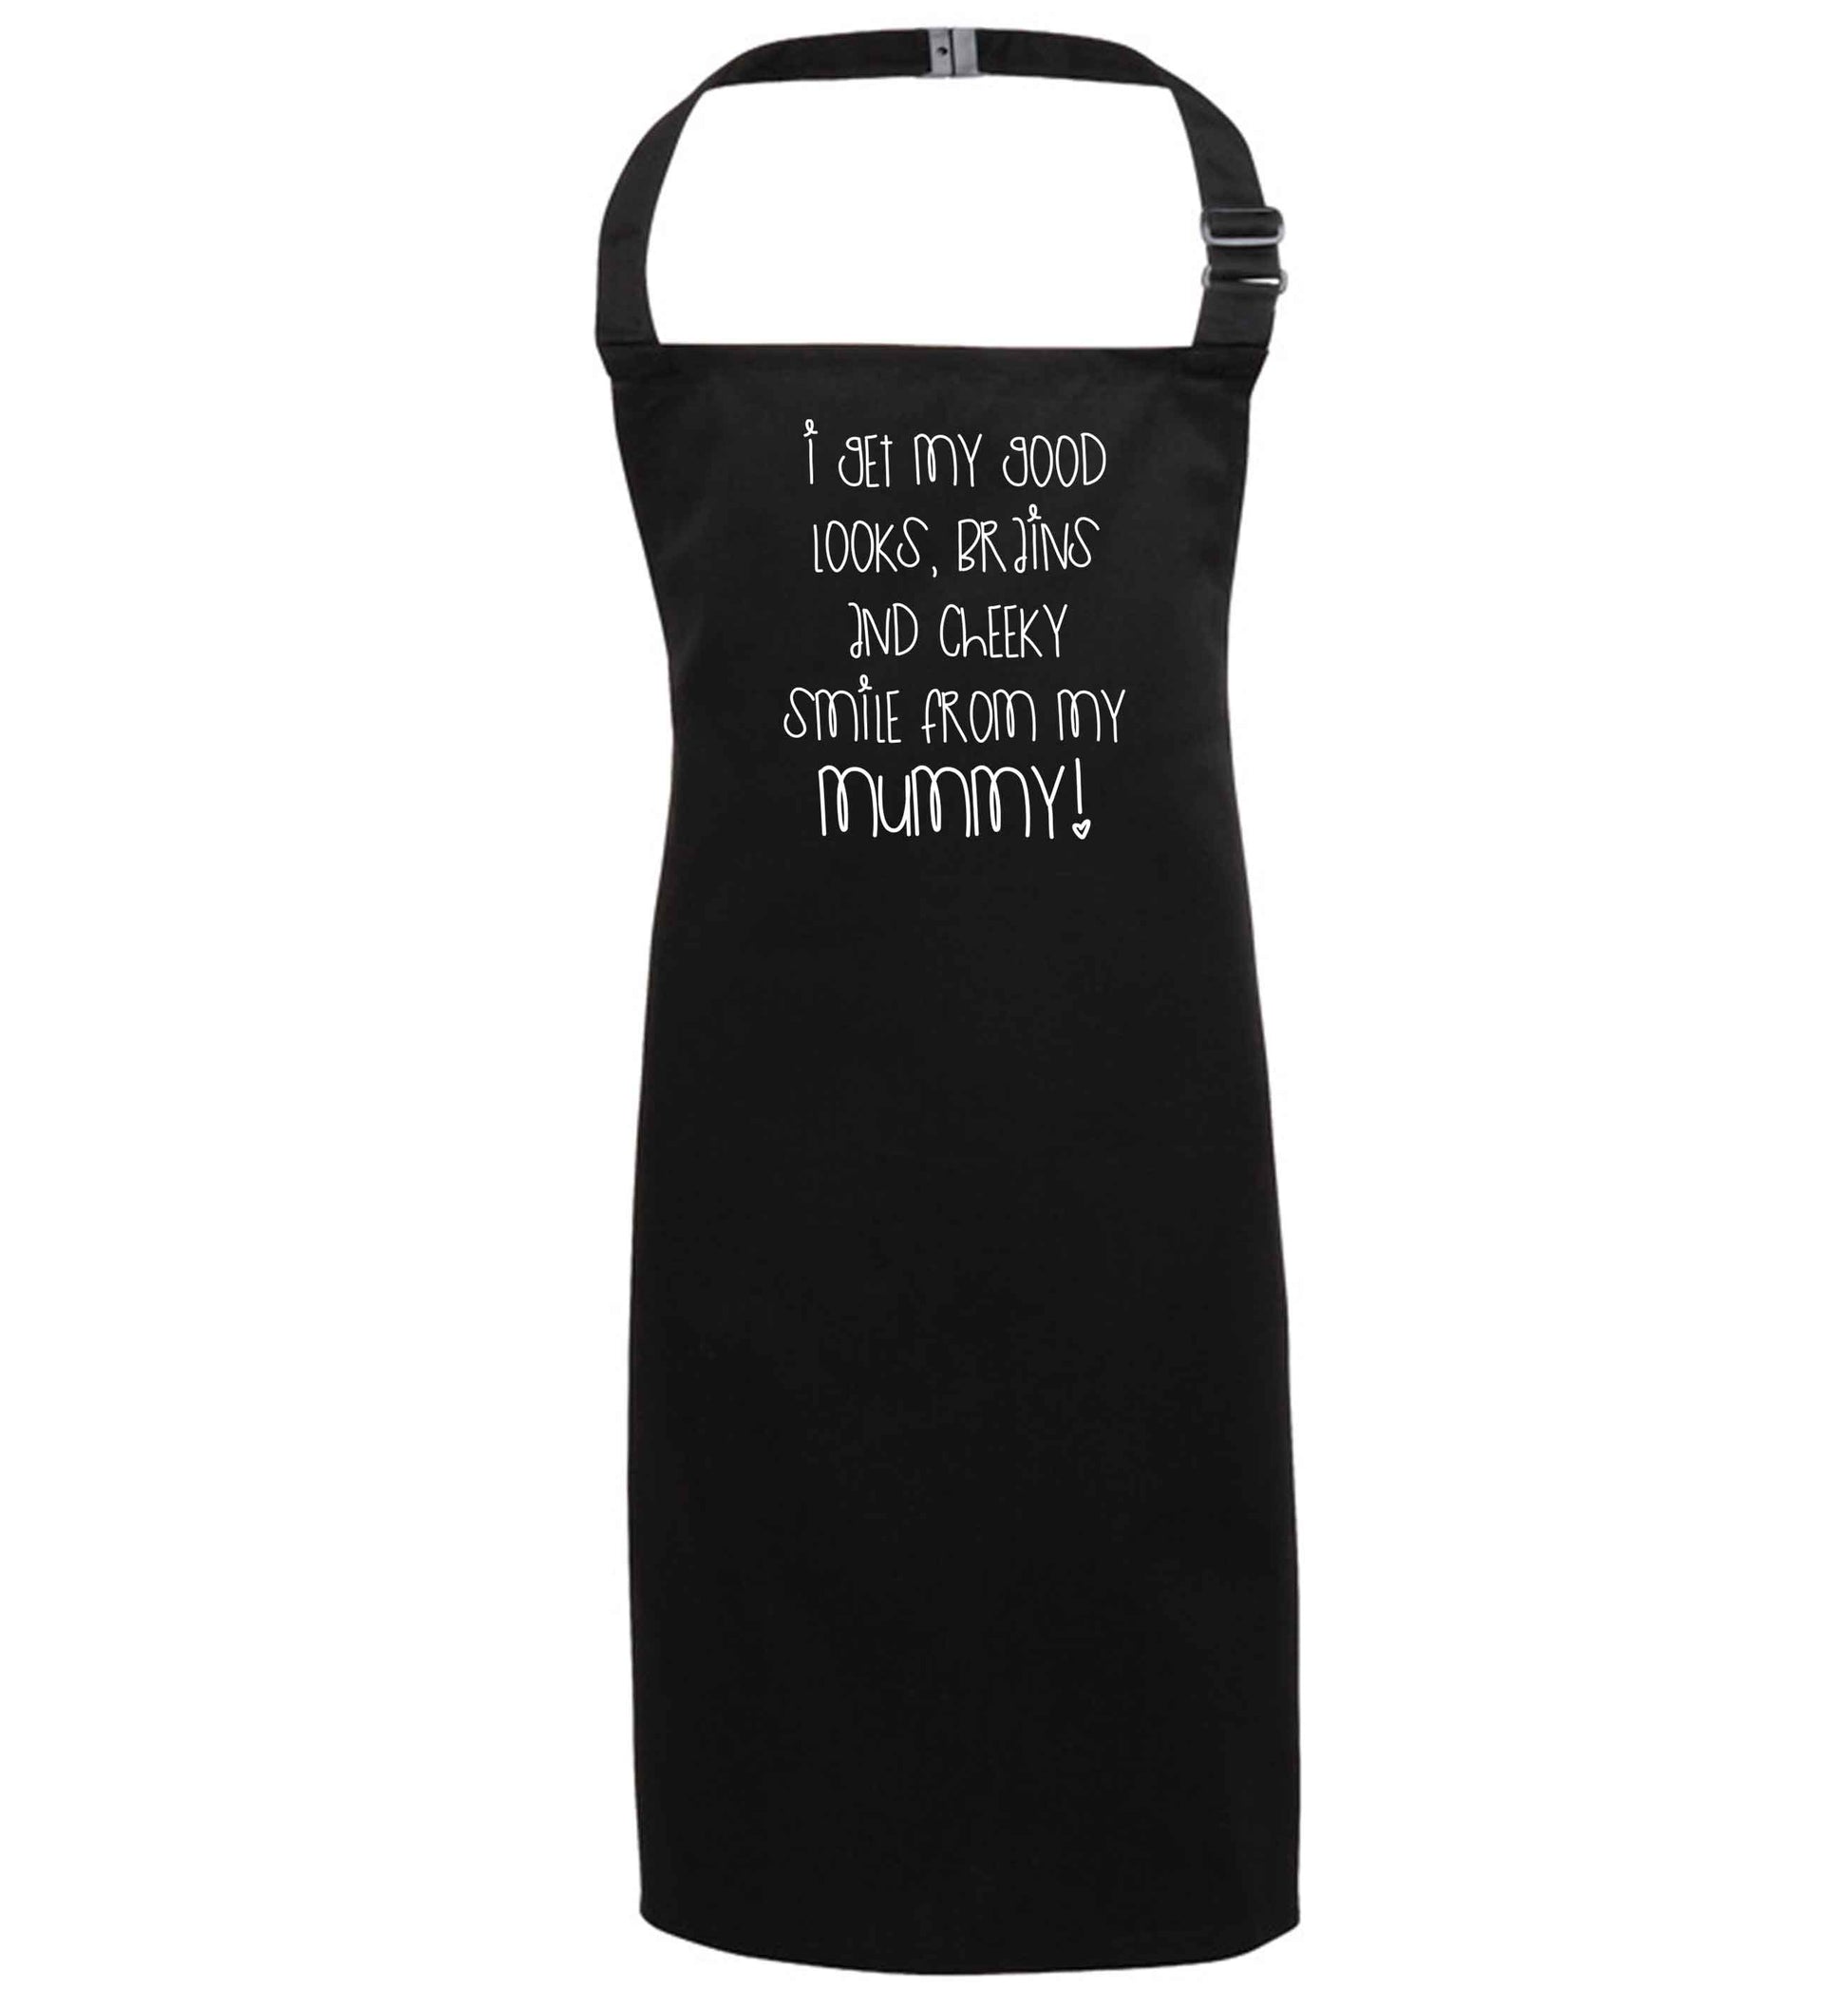 I get my good looks, brains and cheeky smile from my mummy black apron 7-10 years